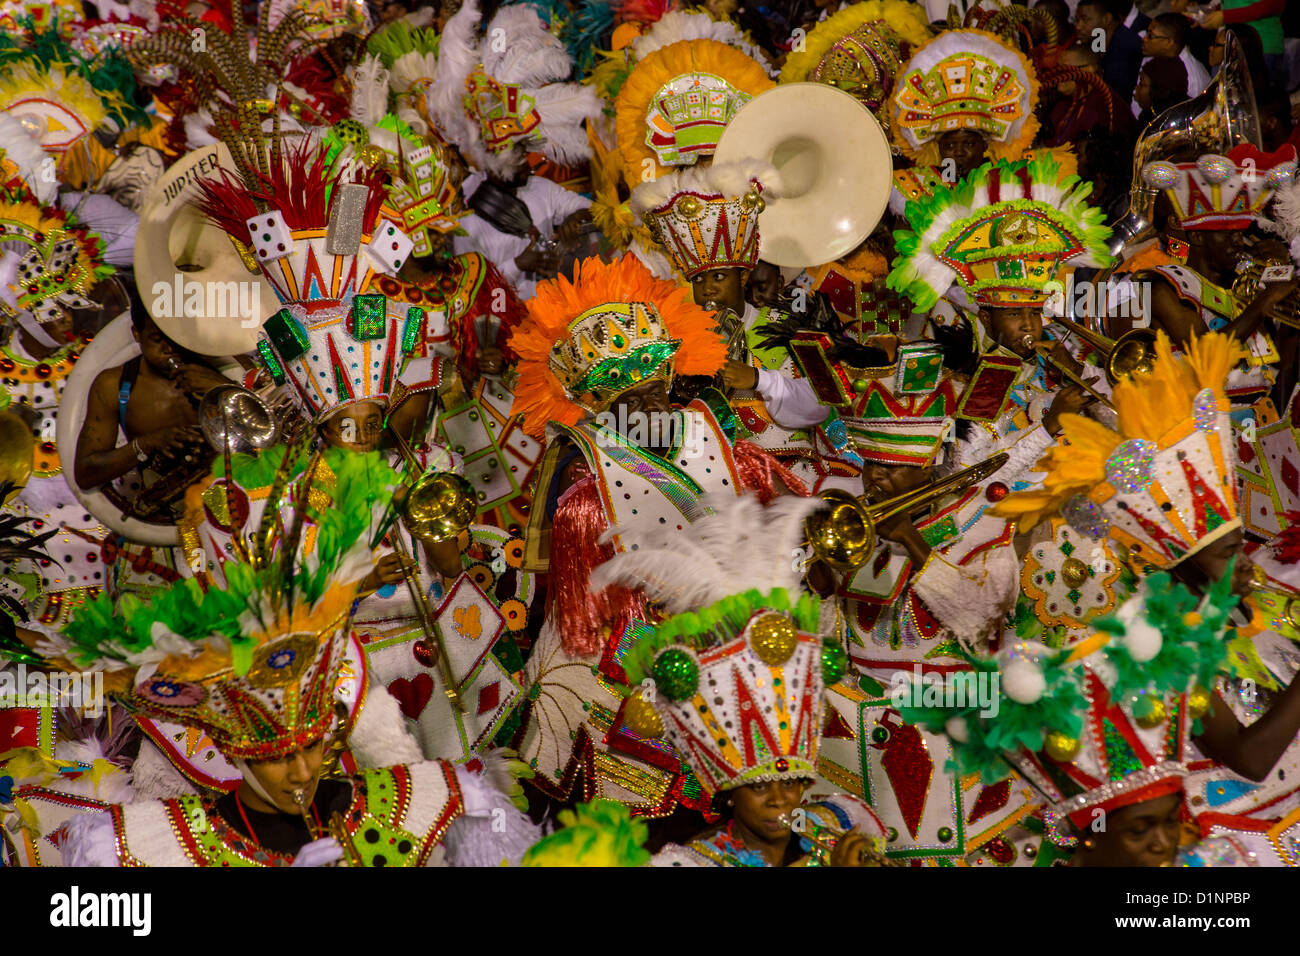 Costumed dancers celebrate the New Year with the Junkanoo Parade on January 1, 2013 in Nassau, Bahamas. The carnival like festival is celebrated in the early hours of the New Year lasting until the late morning and dates back to slavery days. Stock Photo